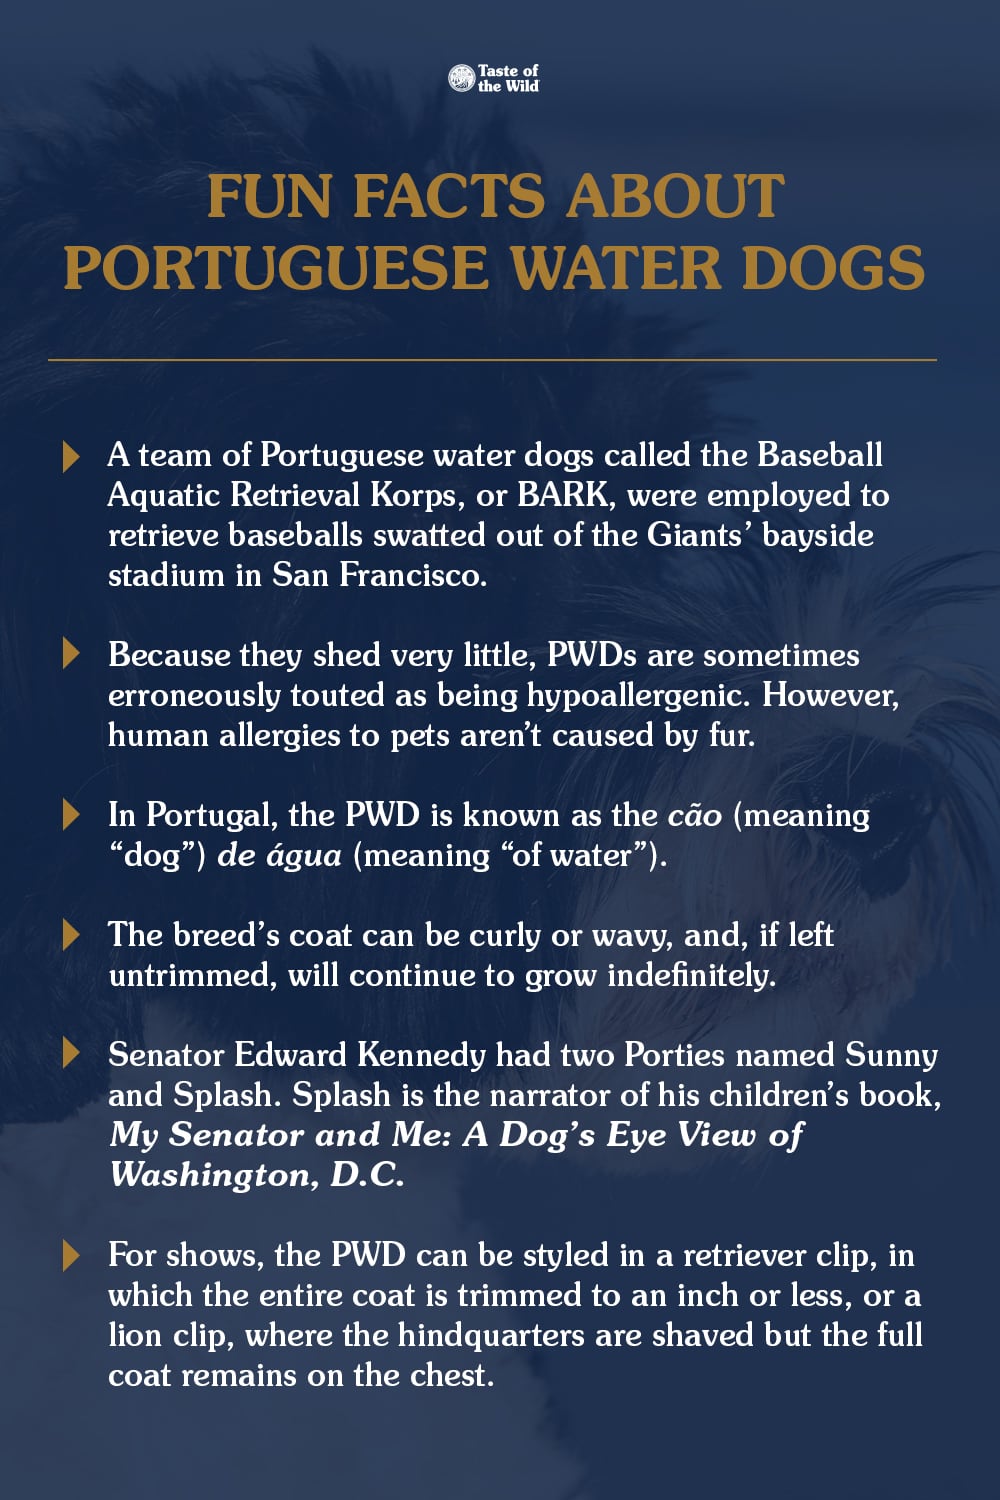 Fun Facts About Portuguese Water Dogs Graphic | Taste of the Wild